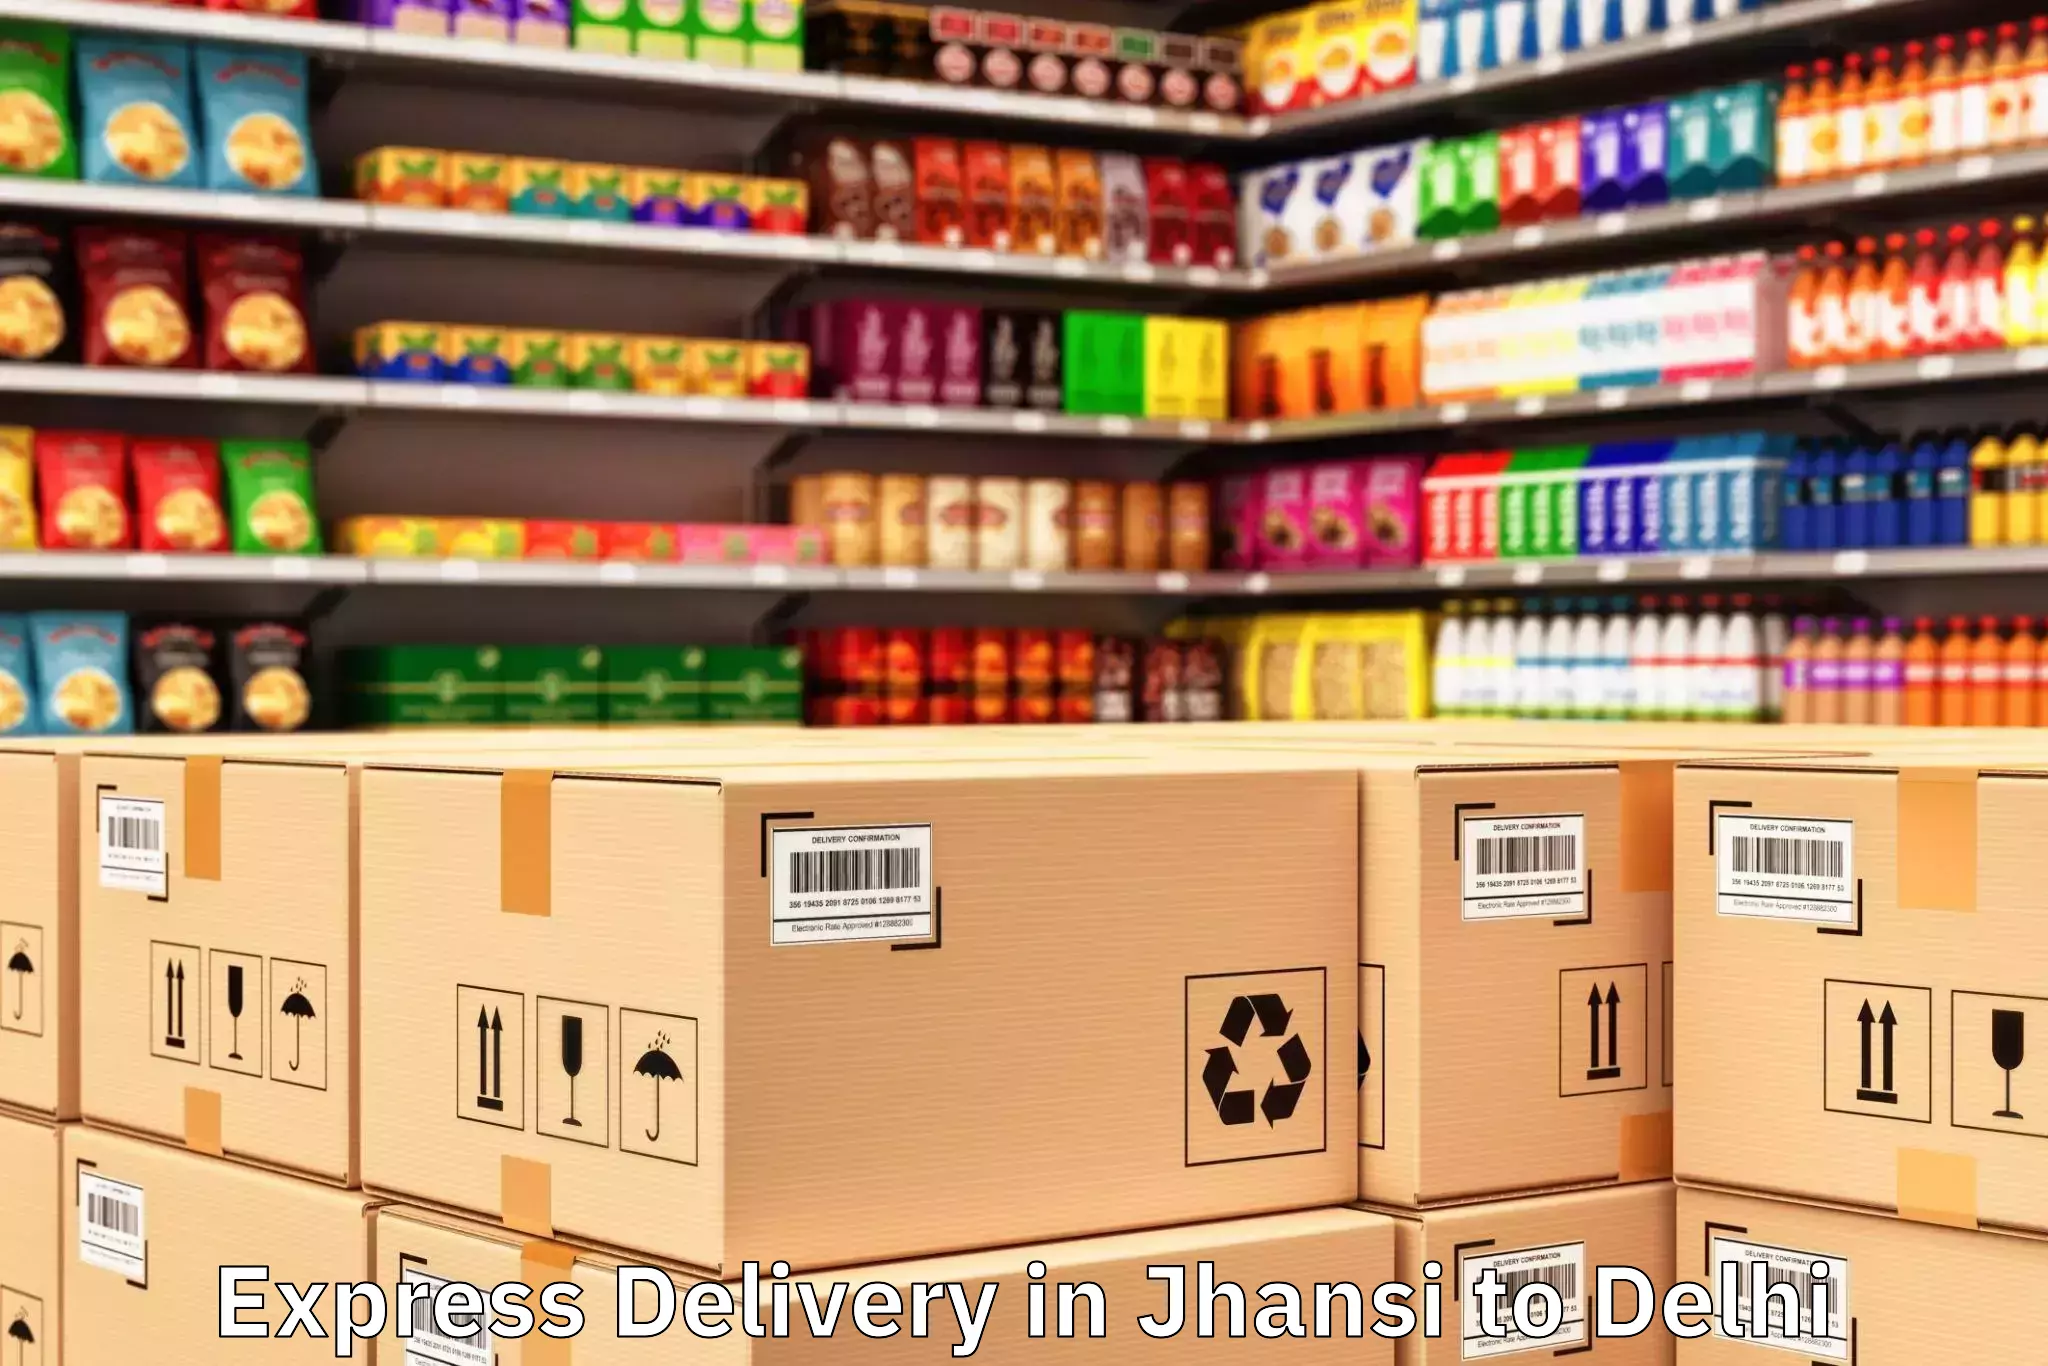 Get Jhansi to Unity One Mall Janakpuri Express Delivery